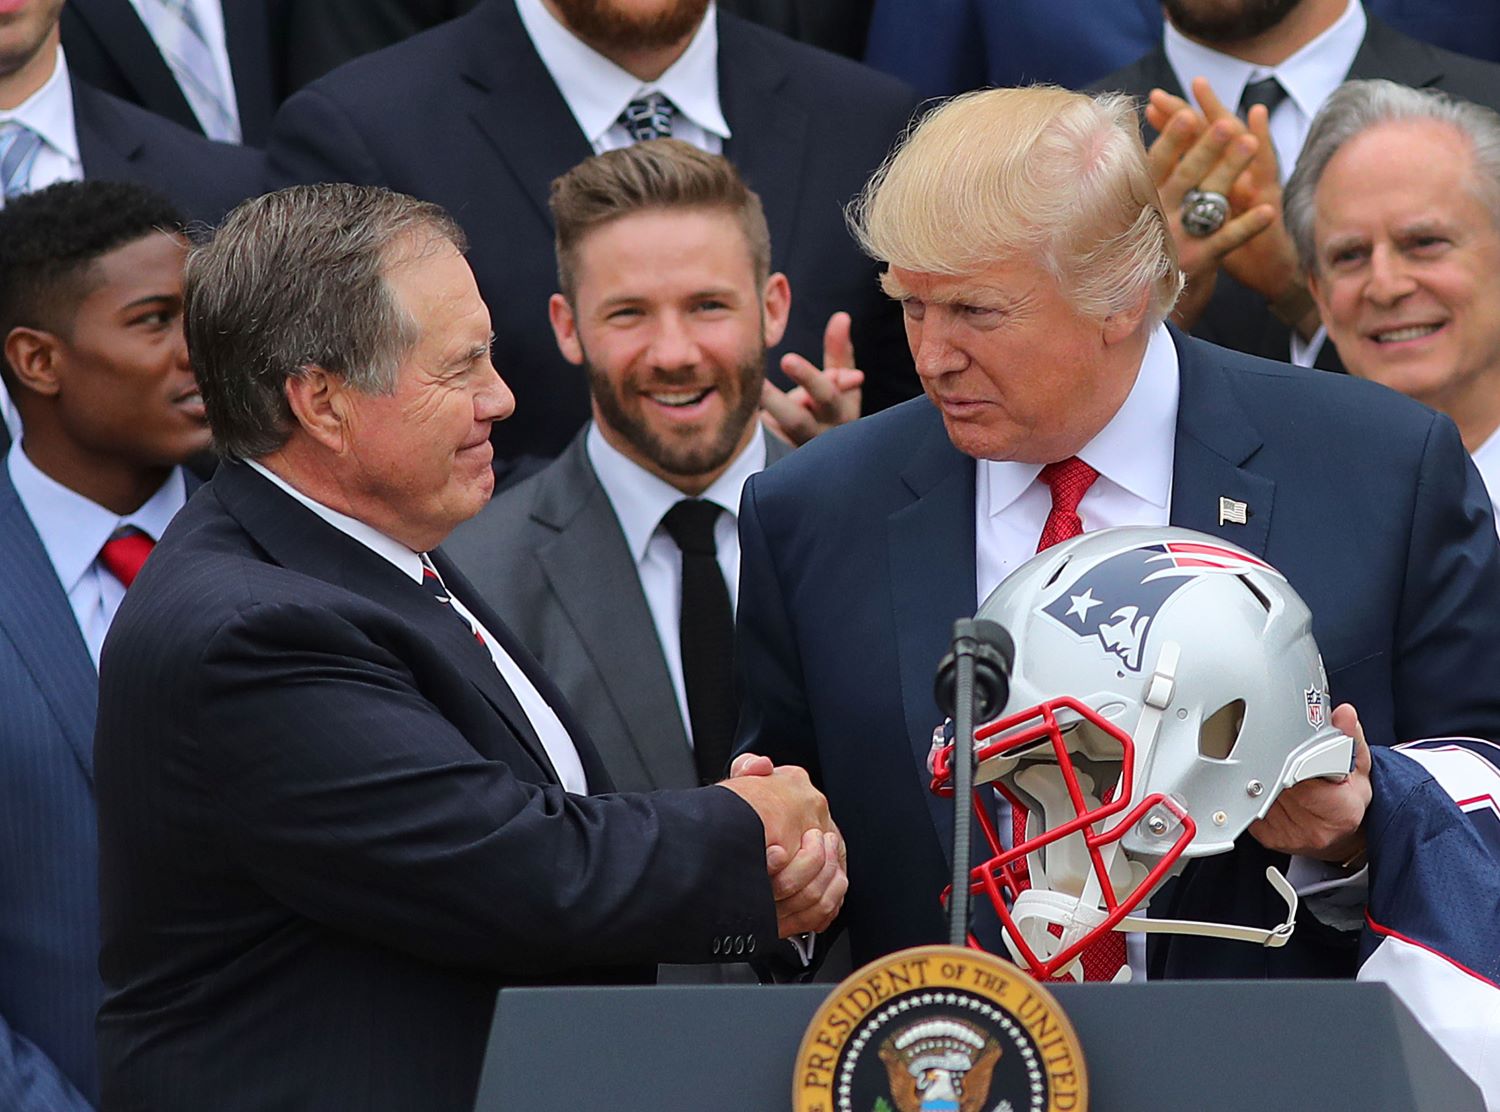 Despite having a well-publicized relationship, Bill Belichick turned his back on Donald Trump and proved he's human after all in the process.